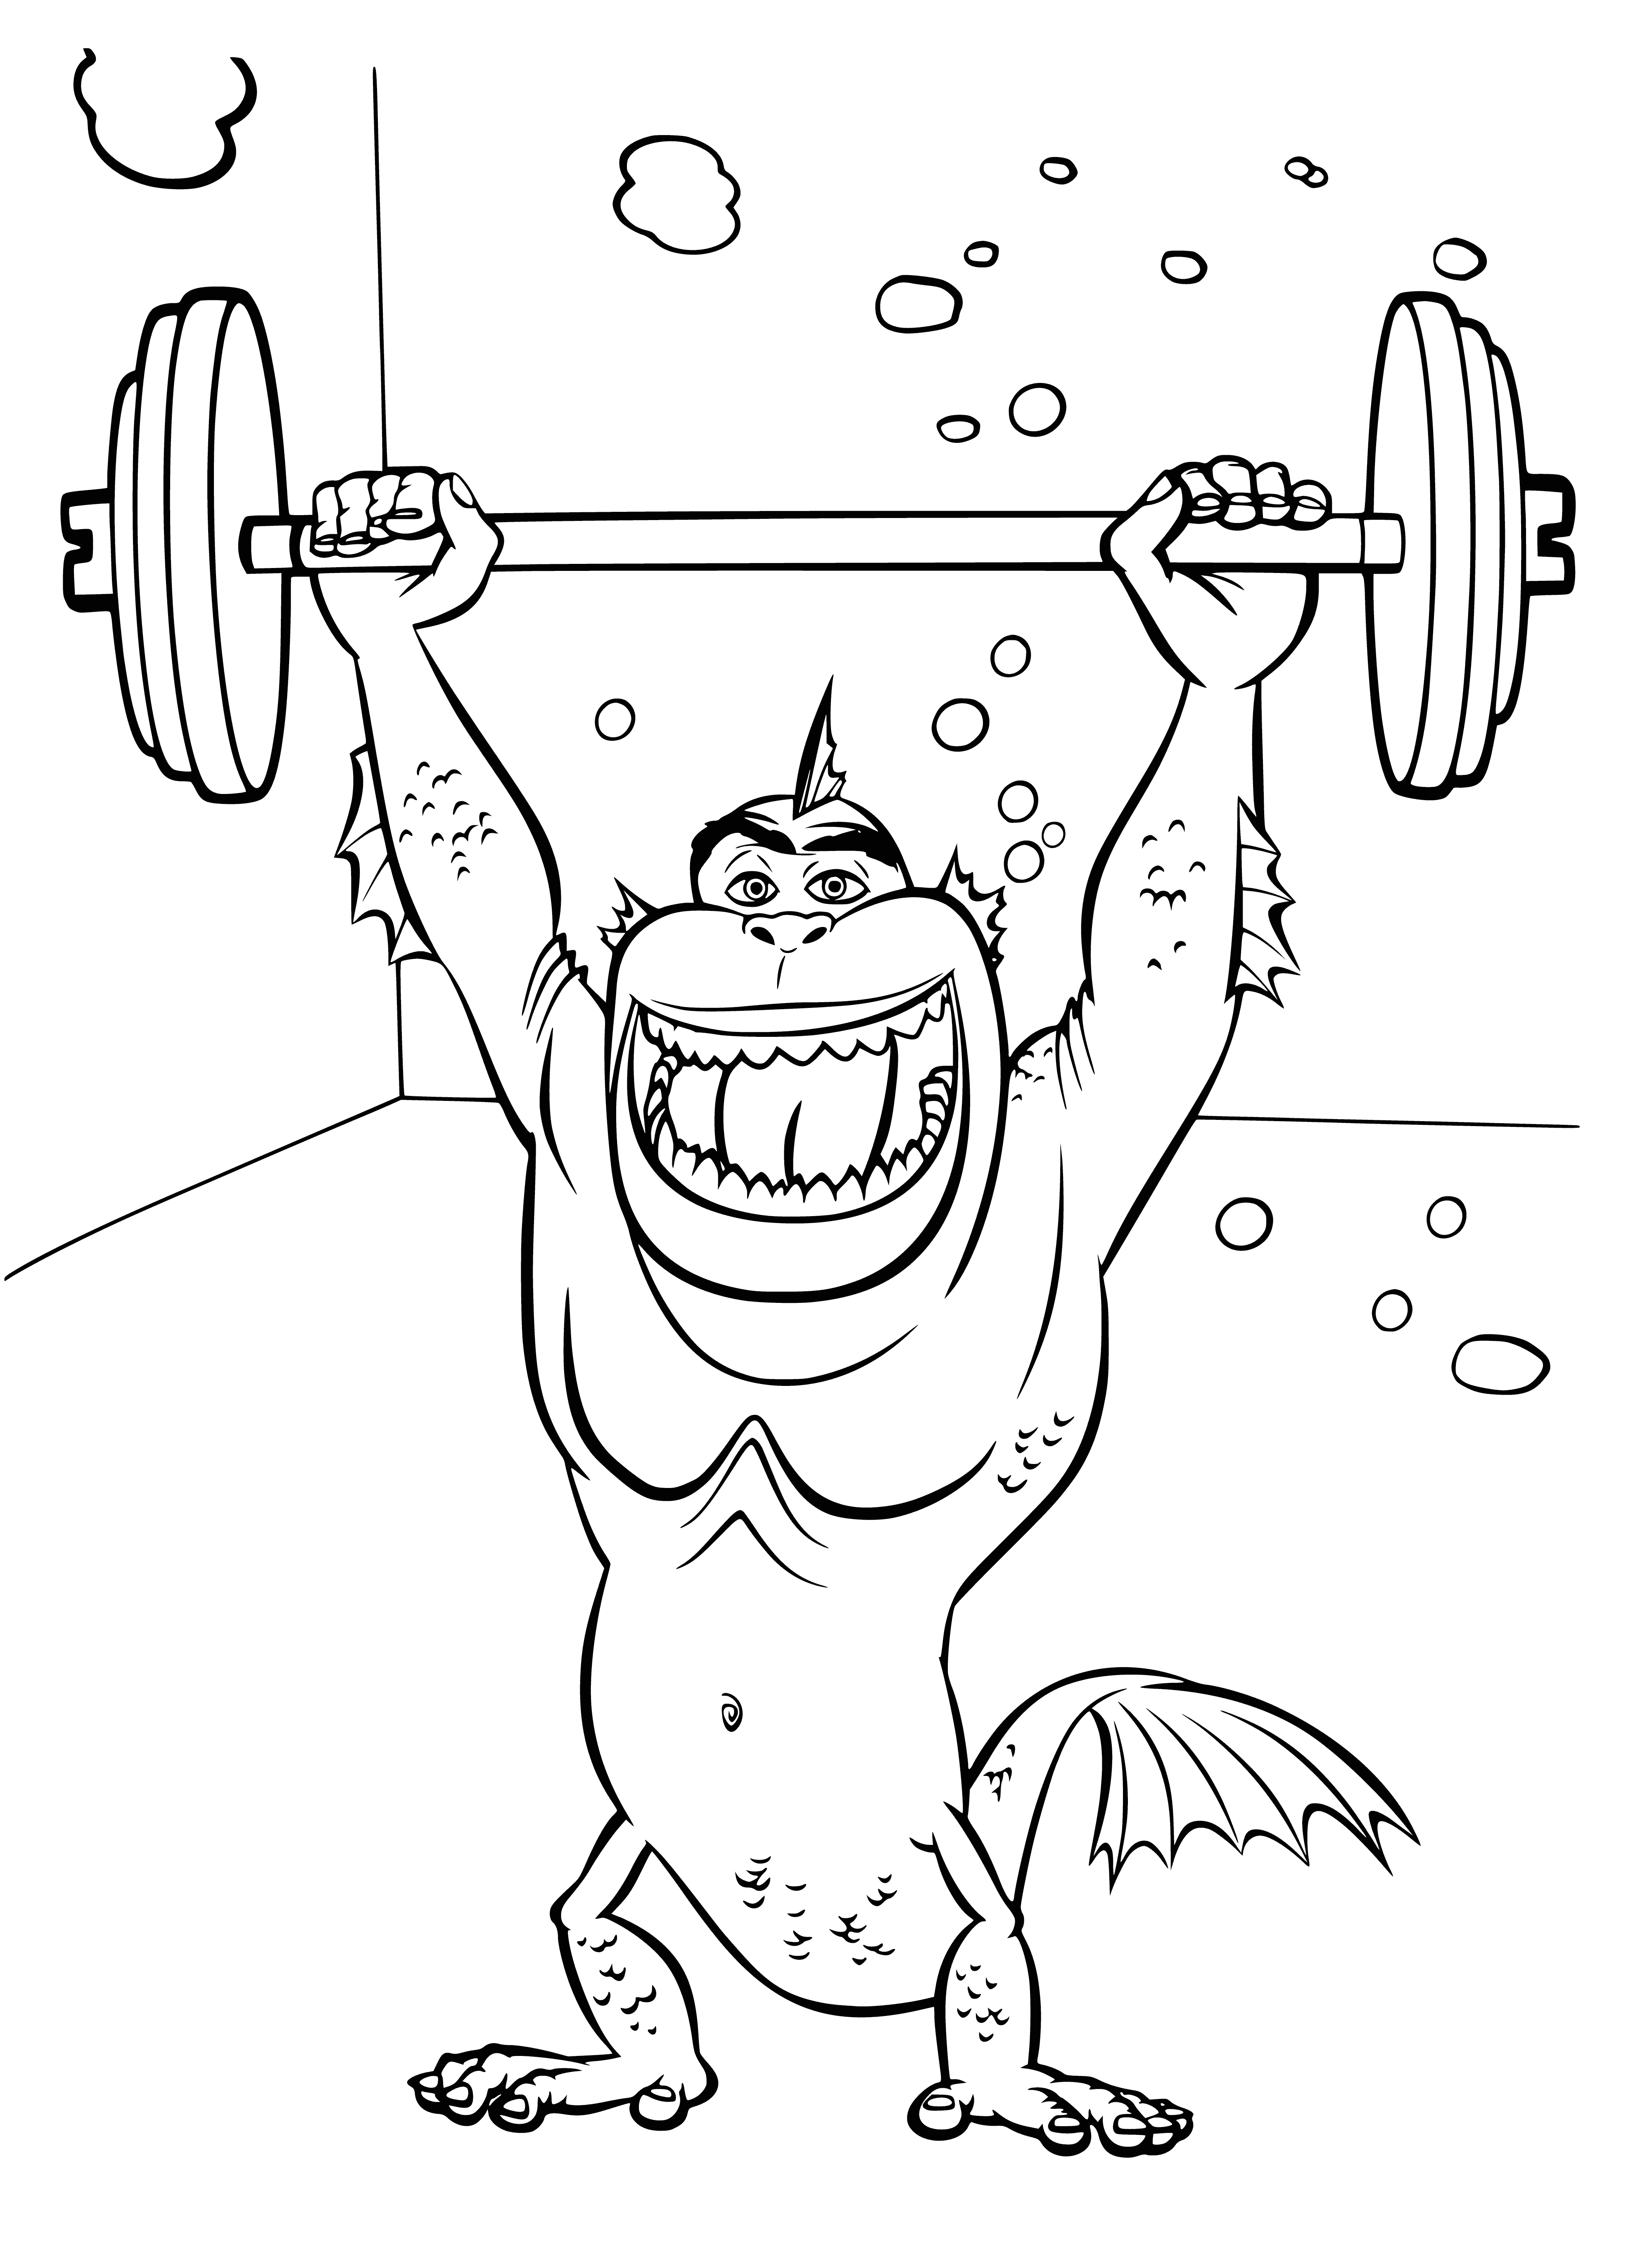 Missing link coloring page